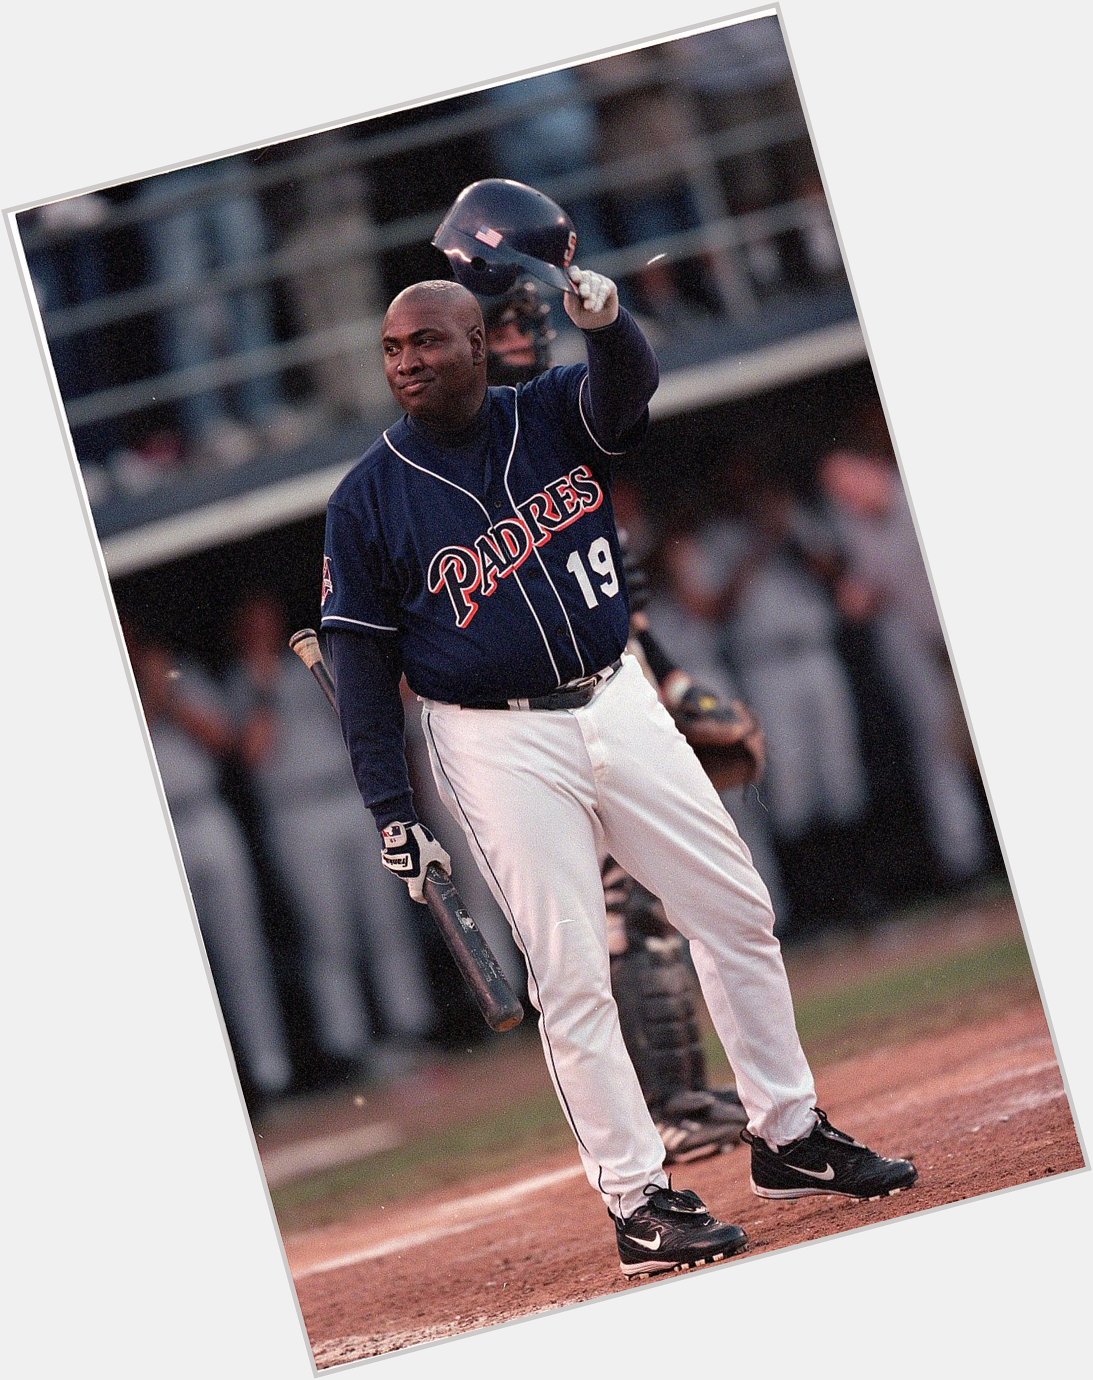 Happy birthday to one of the best hitters in baseball history, the late, great Tony Gwynn  